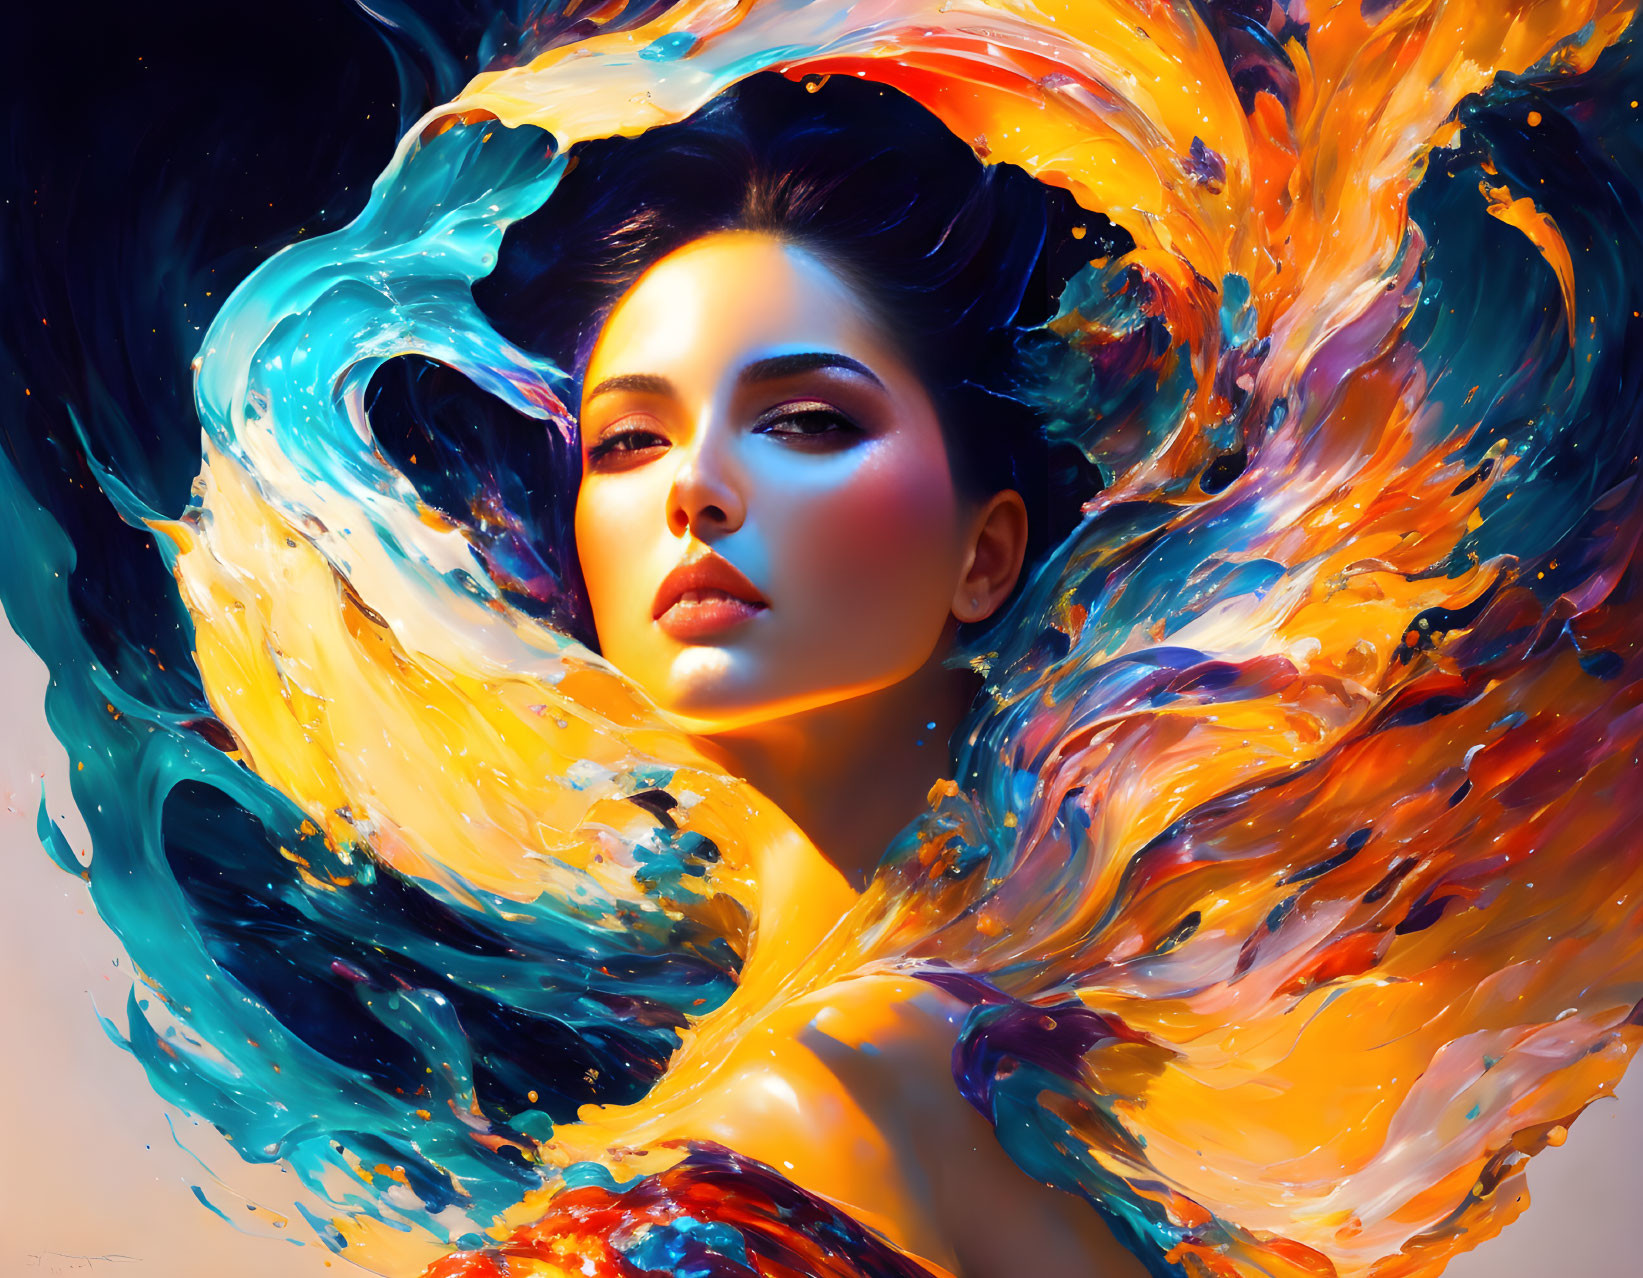 Vibrant swirling aura around woman with striking features